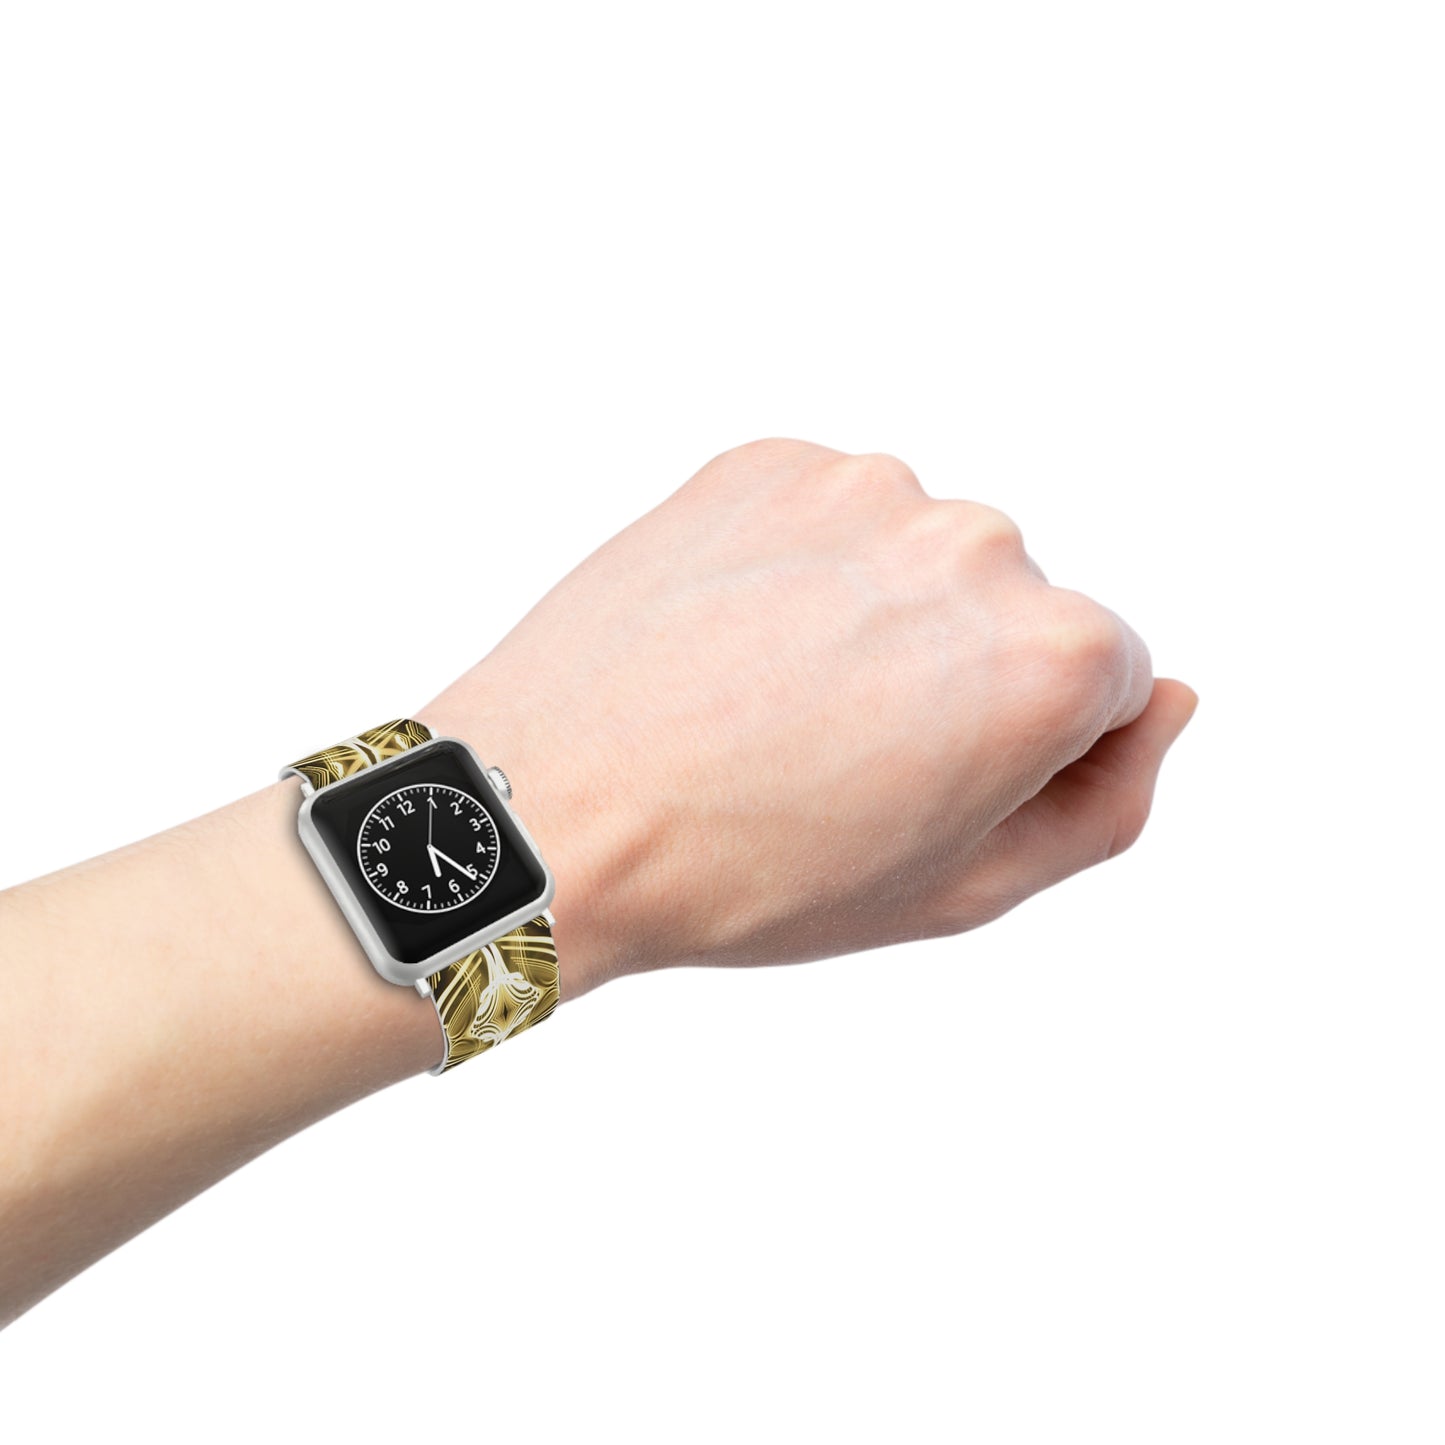 Watch Band for Apple Watch shons light painting